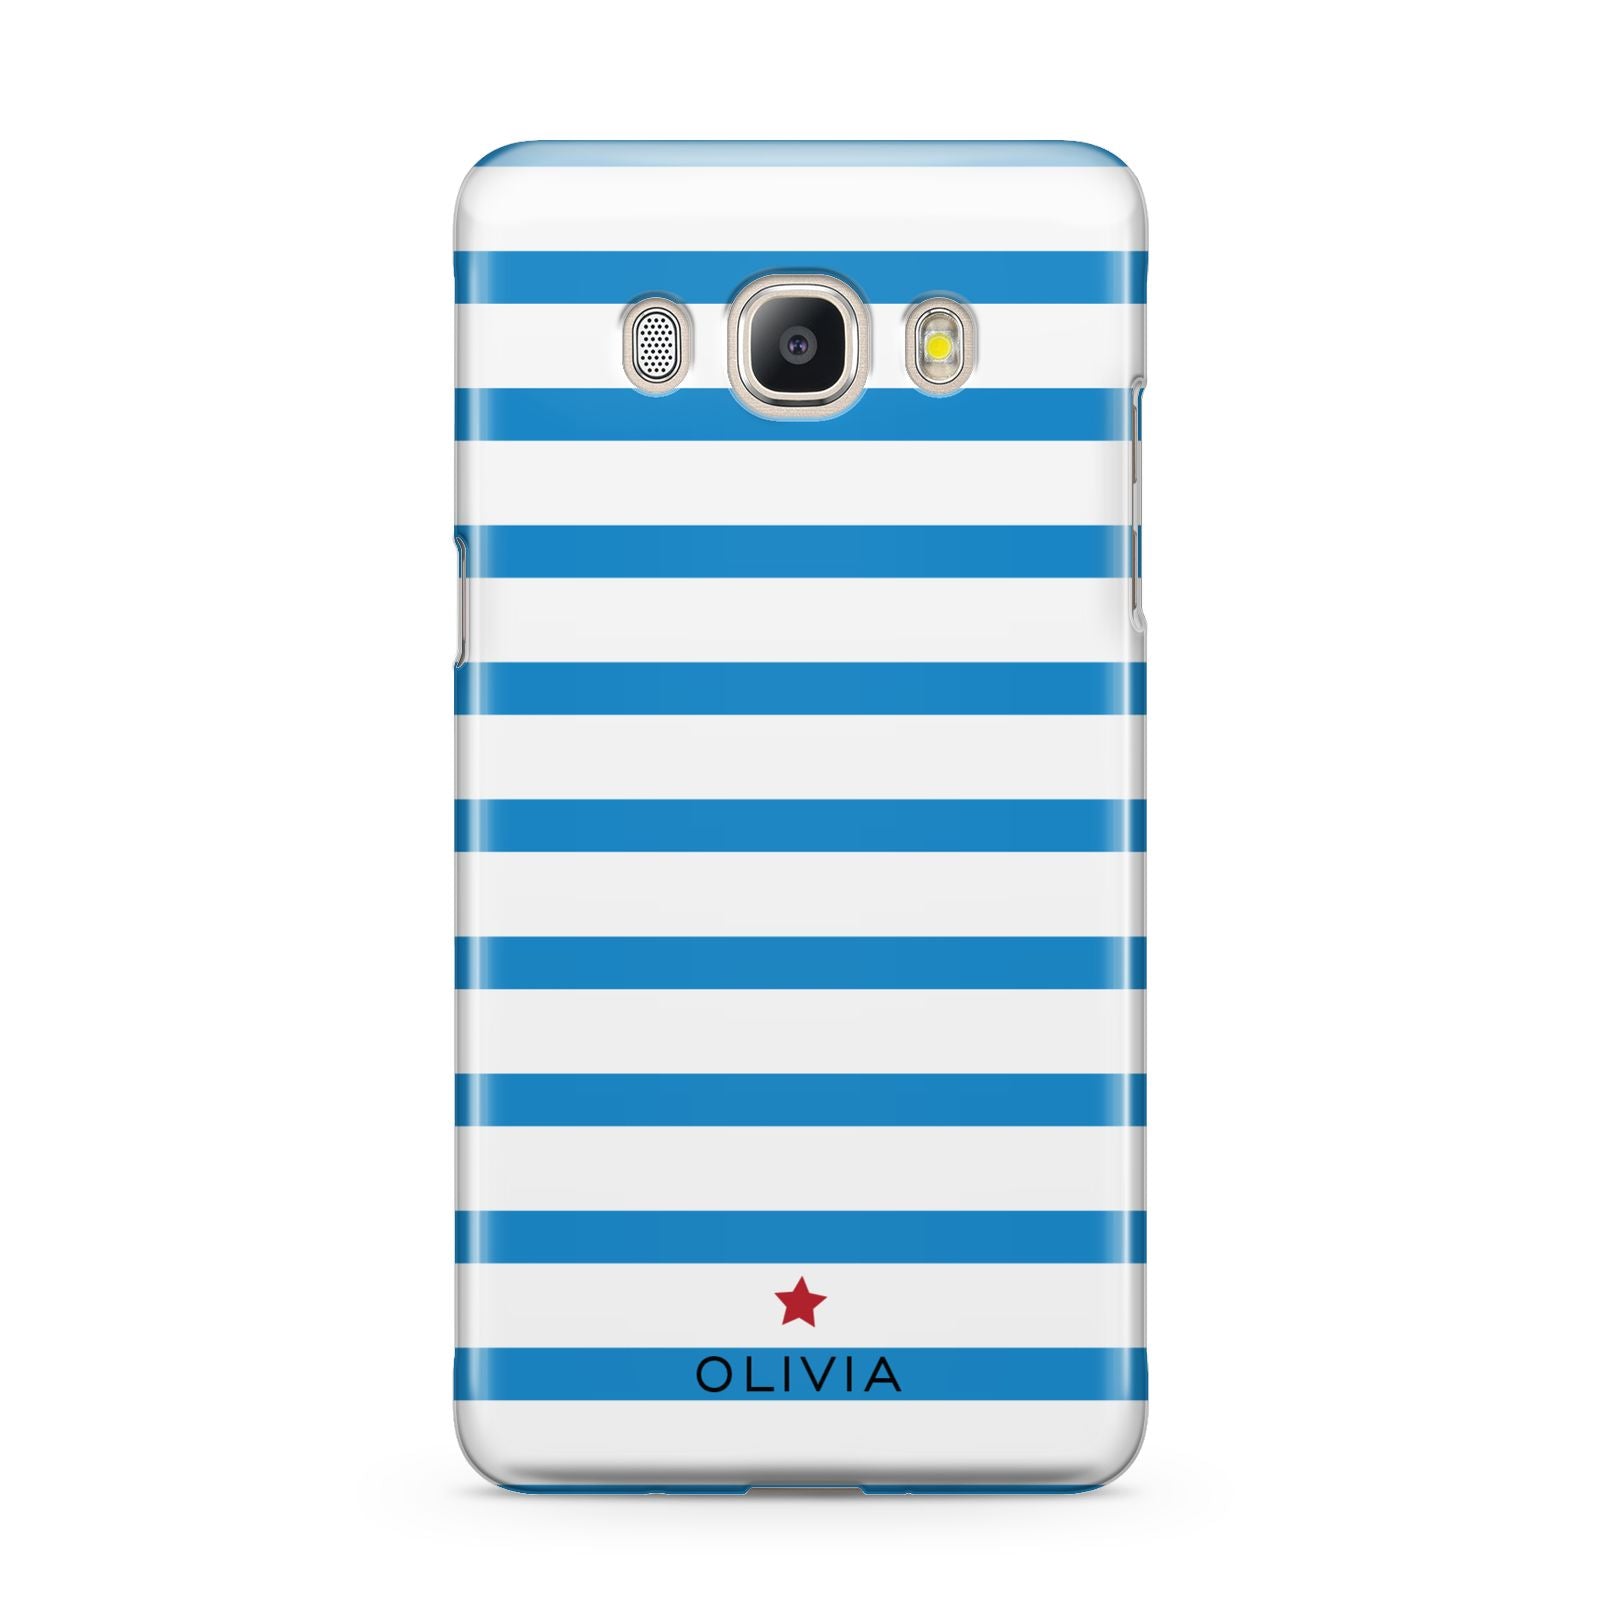 Personalised Name Blue White Samsung Galaxy J5 2016 Case